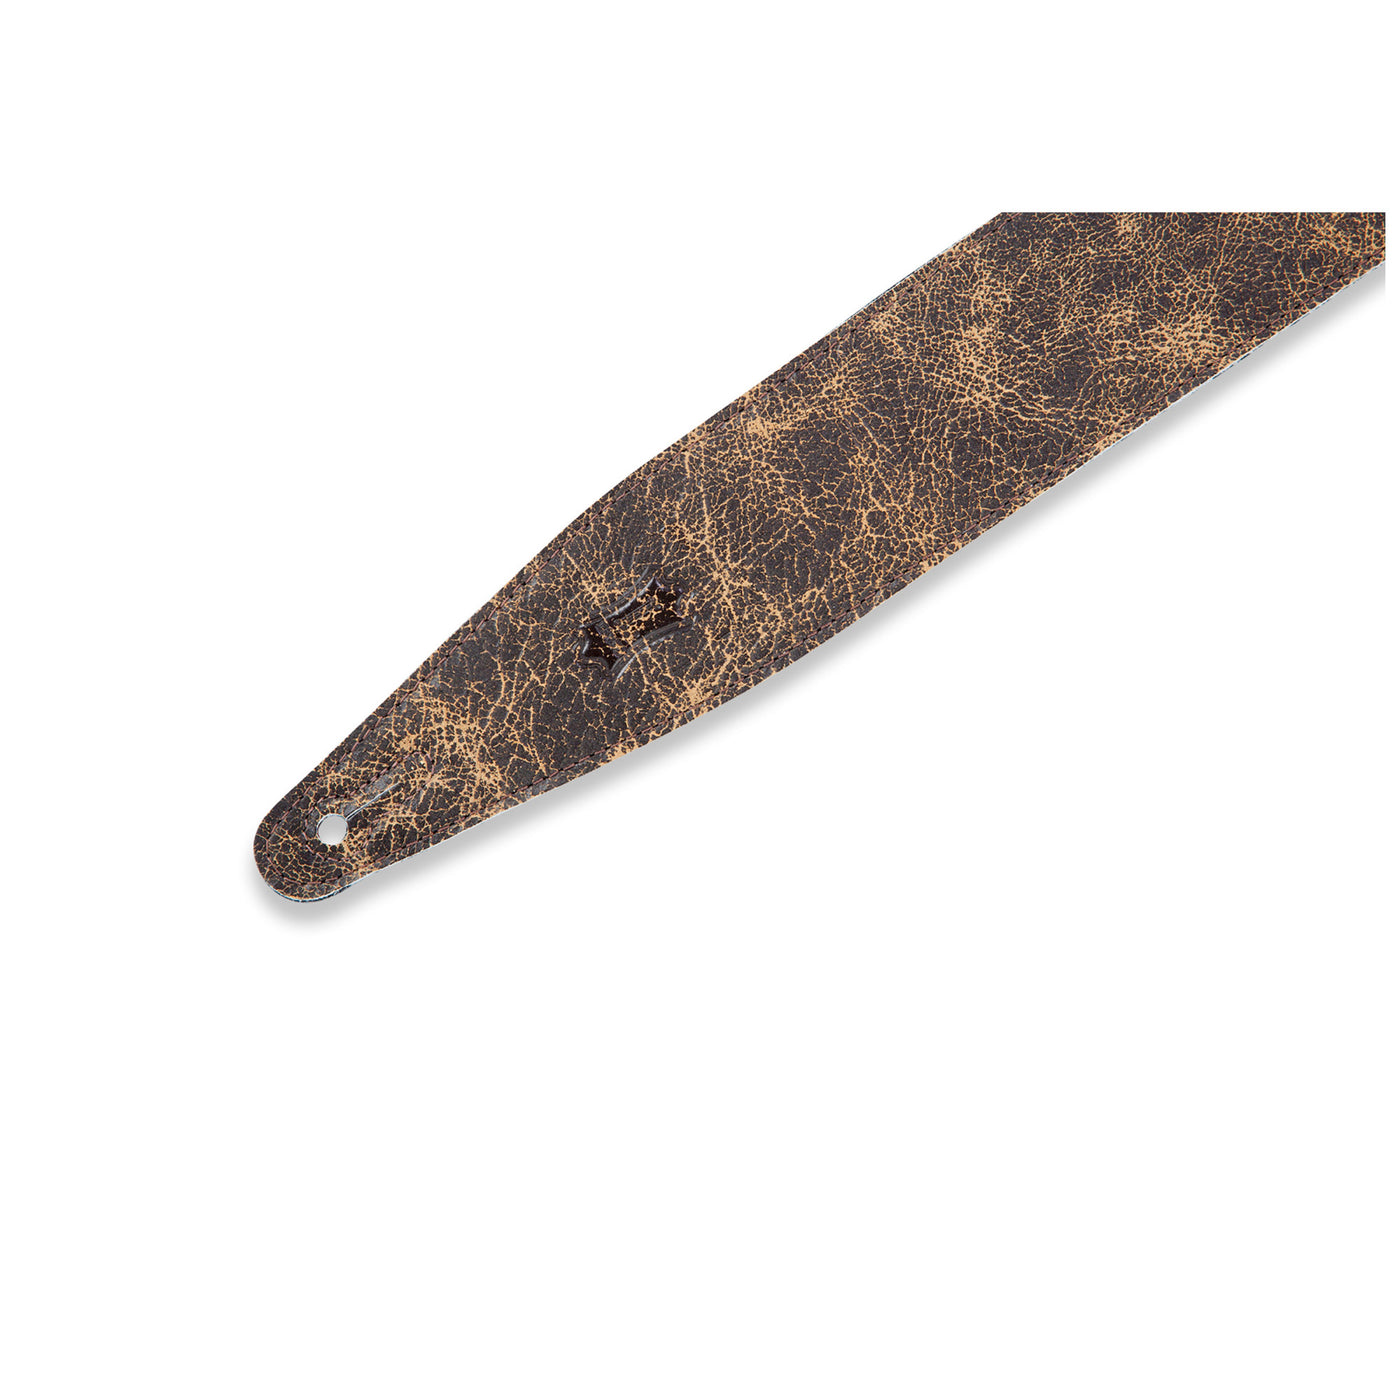 Levy's 2.5" Distressed Leather Strap in Brown